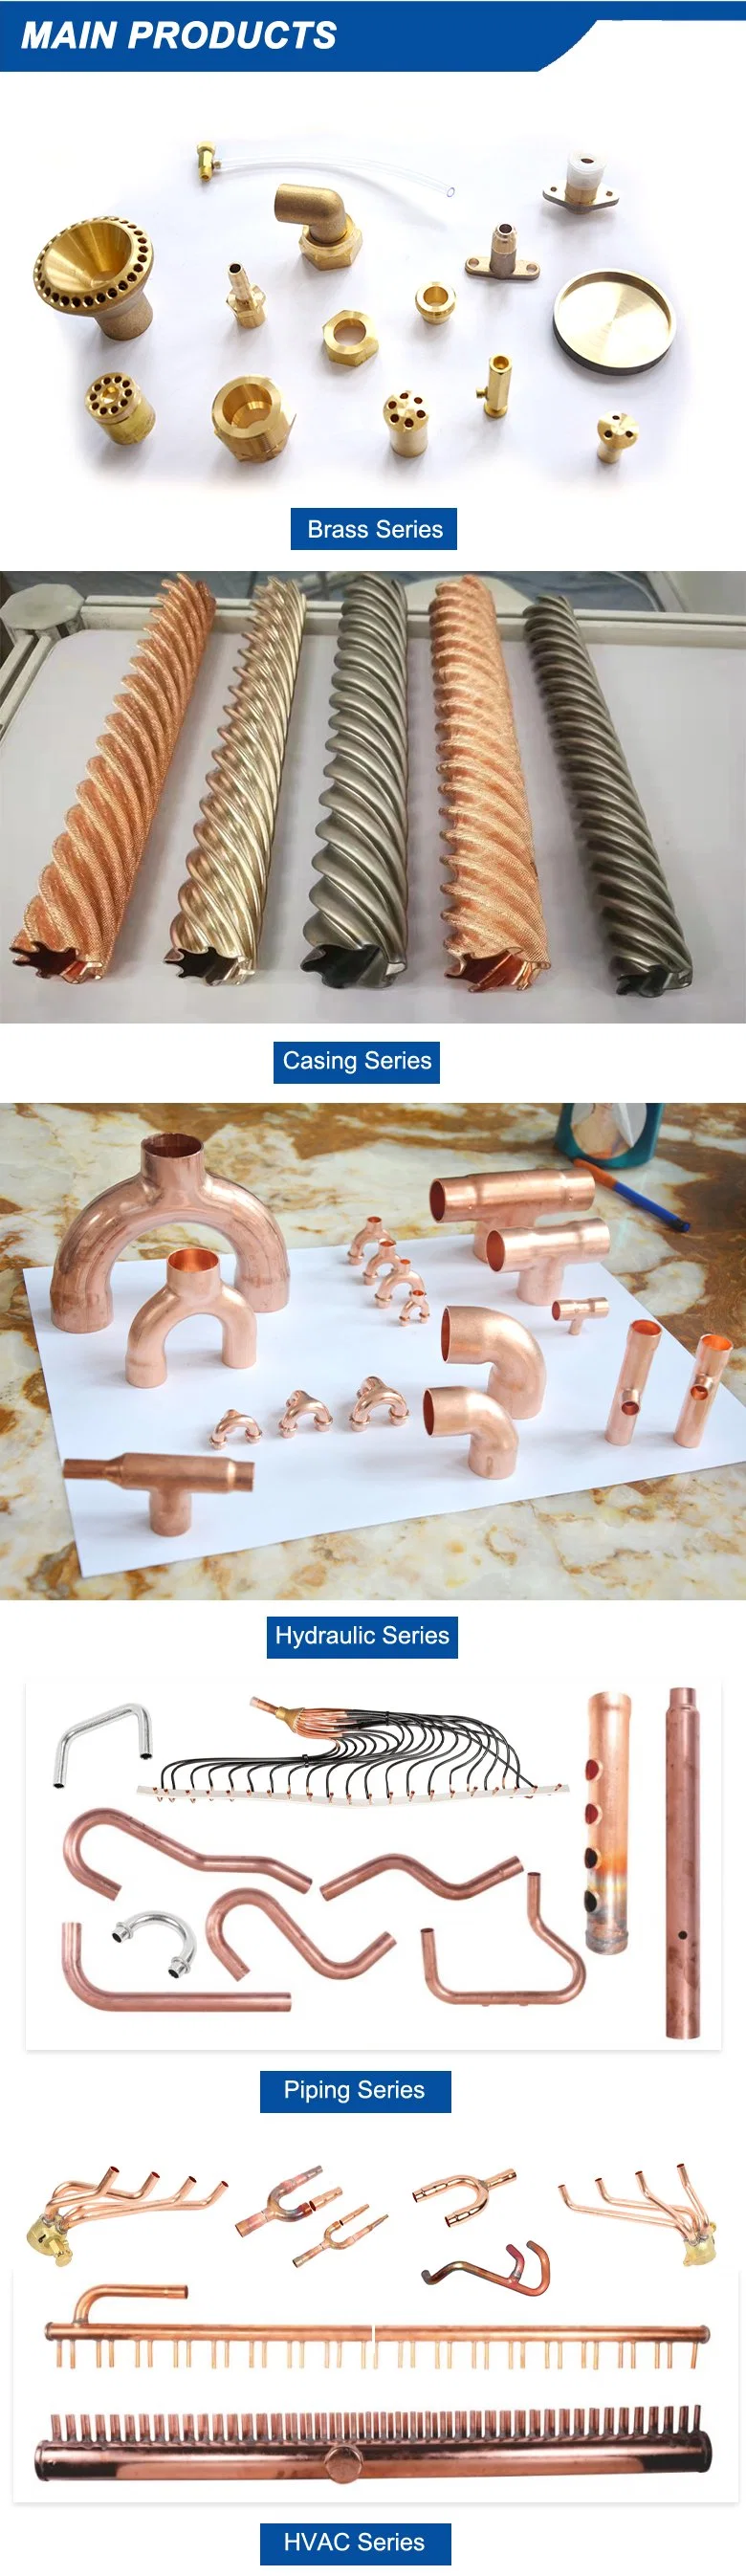 Plumbing Material Connector Male and Female Full Range Size Air Conditioner Copper Press Fittings